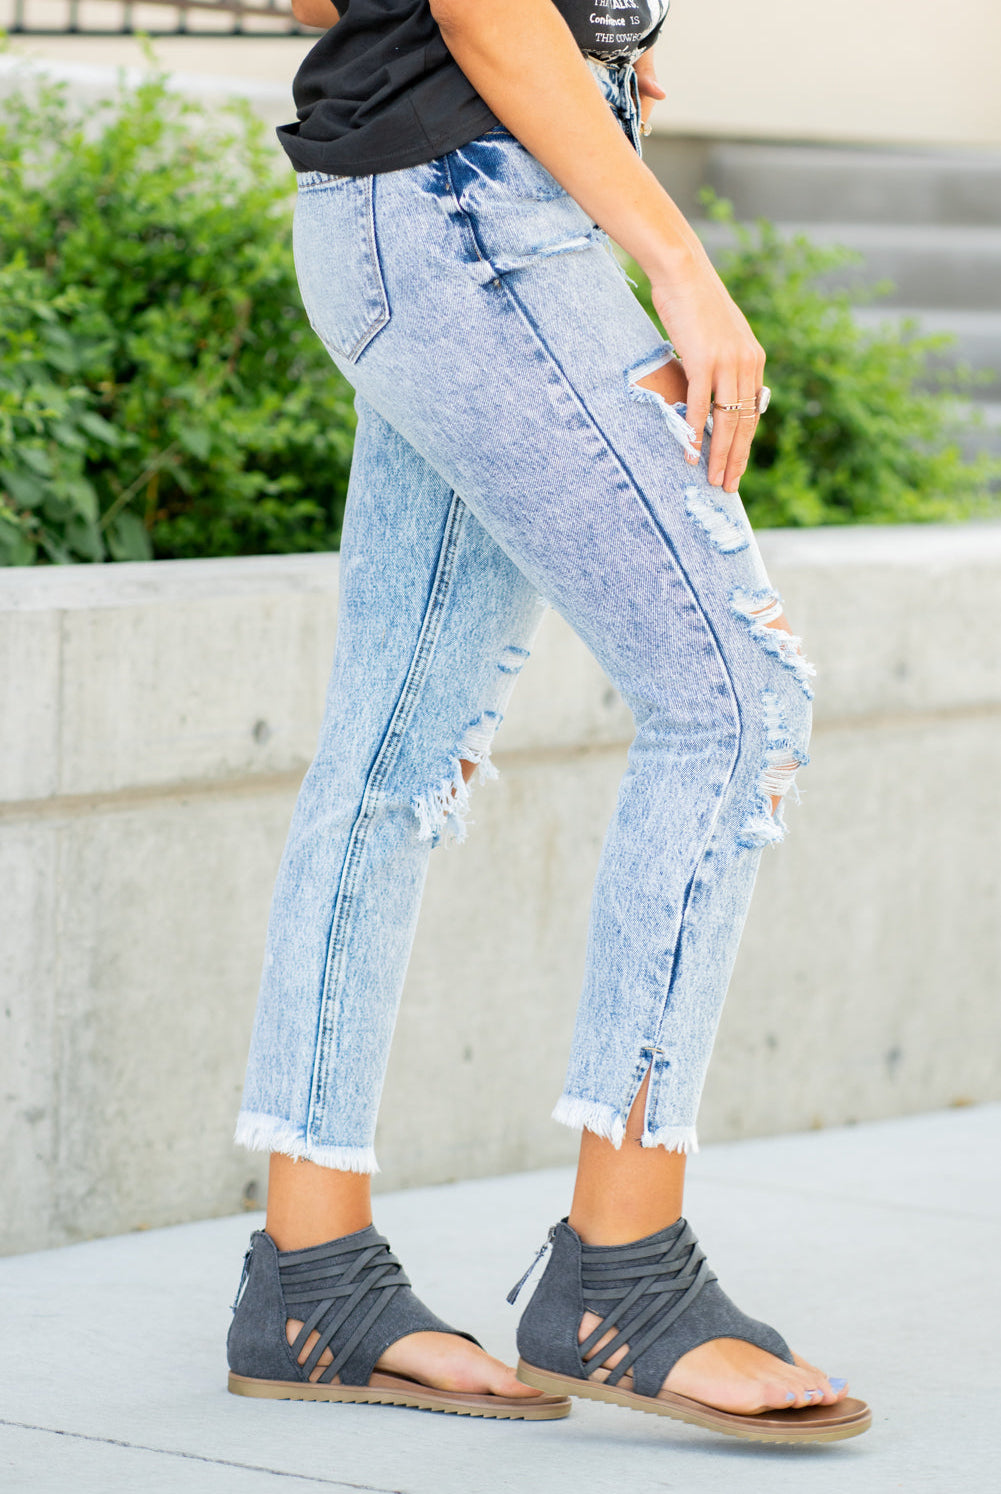 KanCan Jeans These mom jeans will become your go-to! Pair these girlfriend mom fit with sandals and a tee for an easy summer look.  Collection: Spring 2021 Color: Medium Blue Wash Cut: Straight Fit, 27" Inseam  Rise: High-Rise, 10.5" Front Rise 100% Cotton  Fly: Exposed Button Fly Style #: KC5201M Contact us for any additional measurements or sizing.  